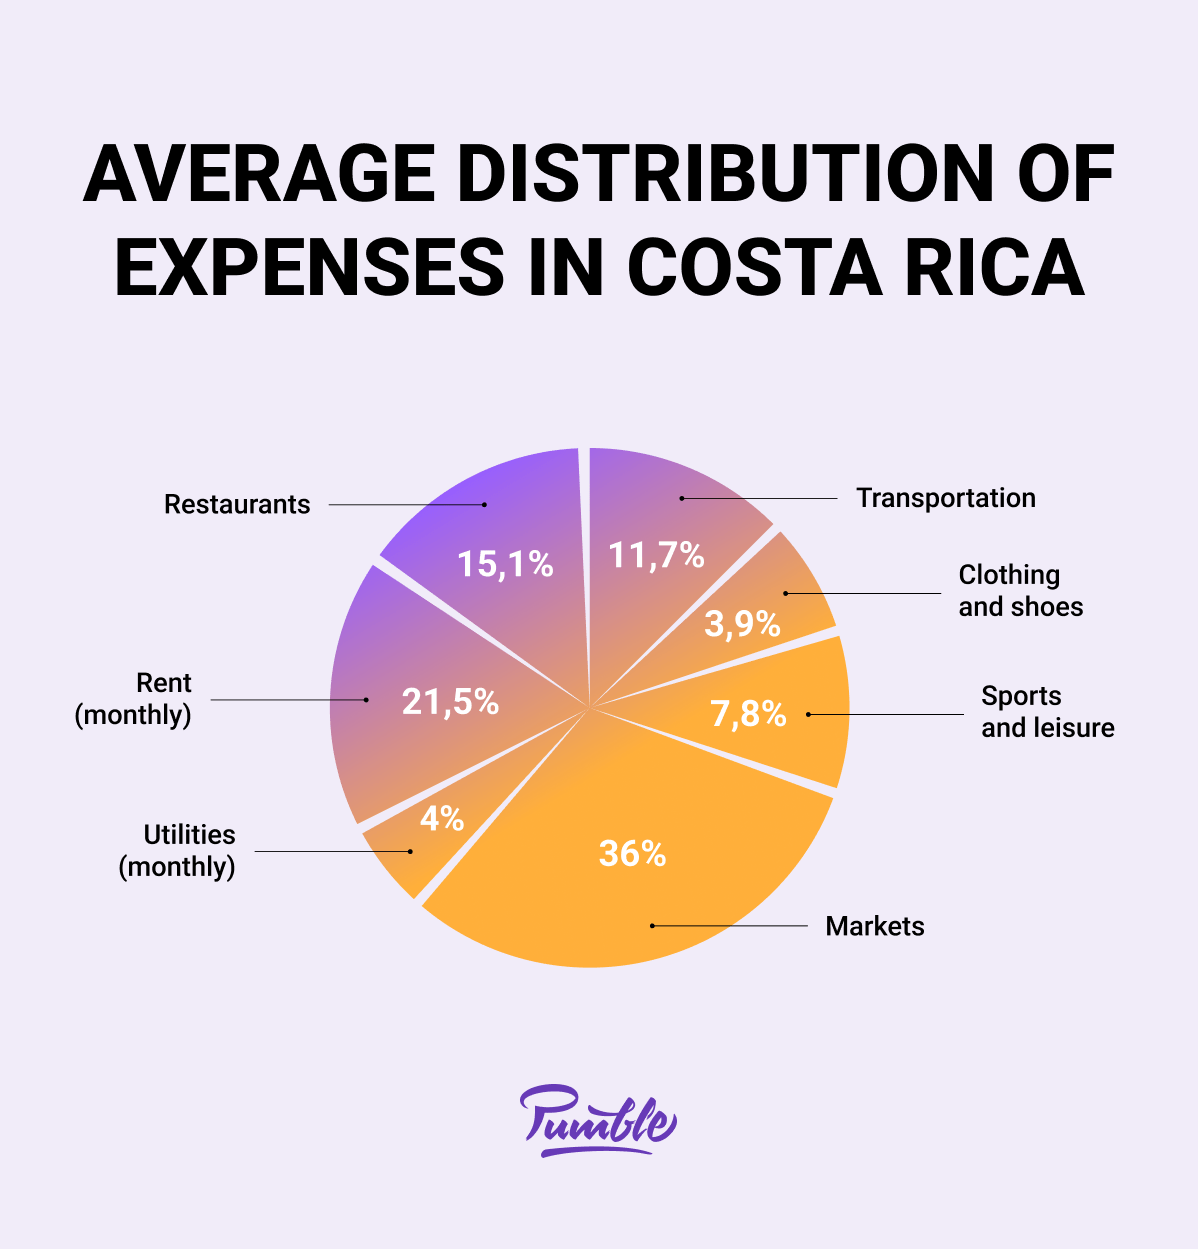 Average distribution of expenses in Costa Rica